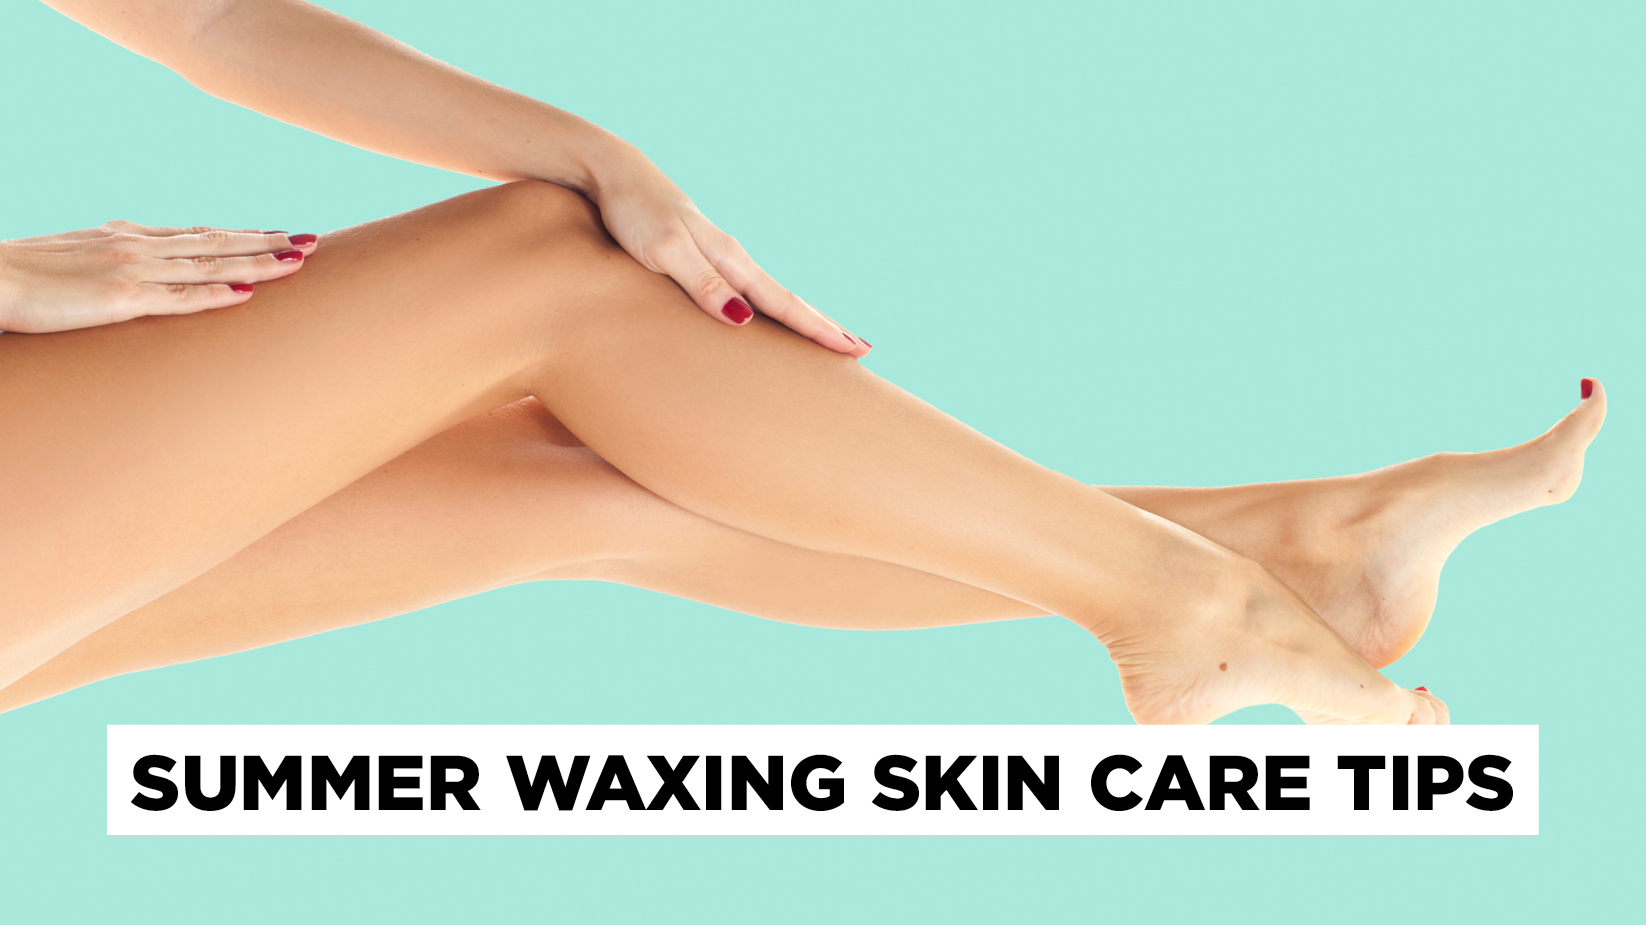 Follow these tips by Jax Wax to take the heat out of waxing this Summer.